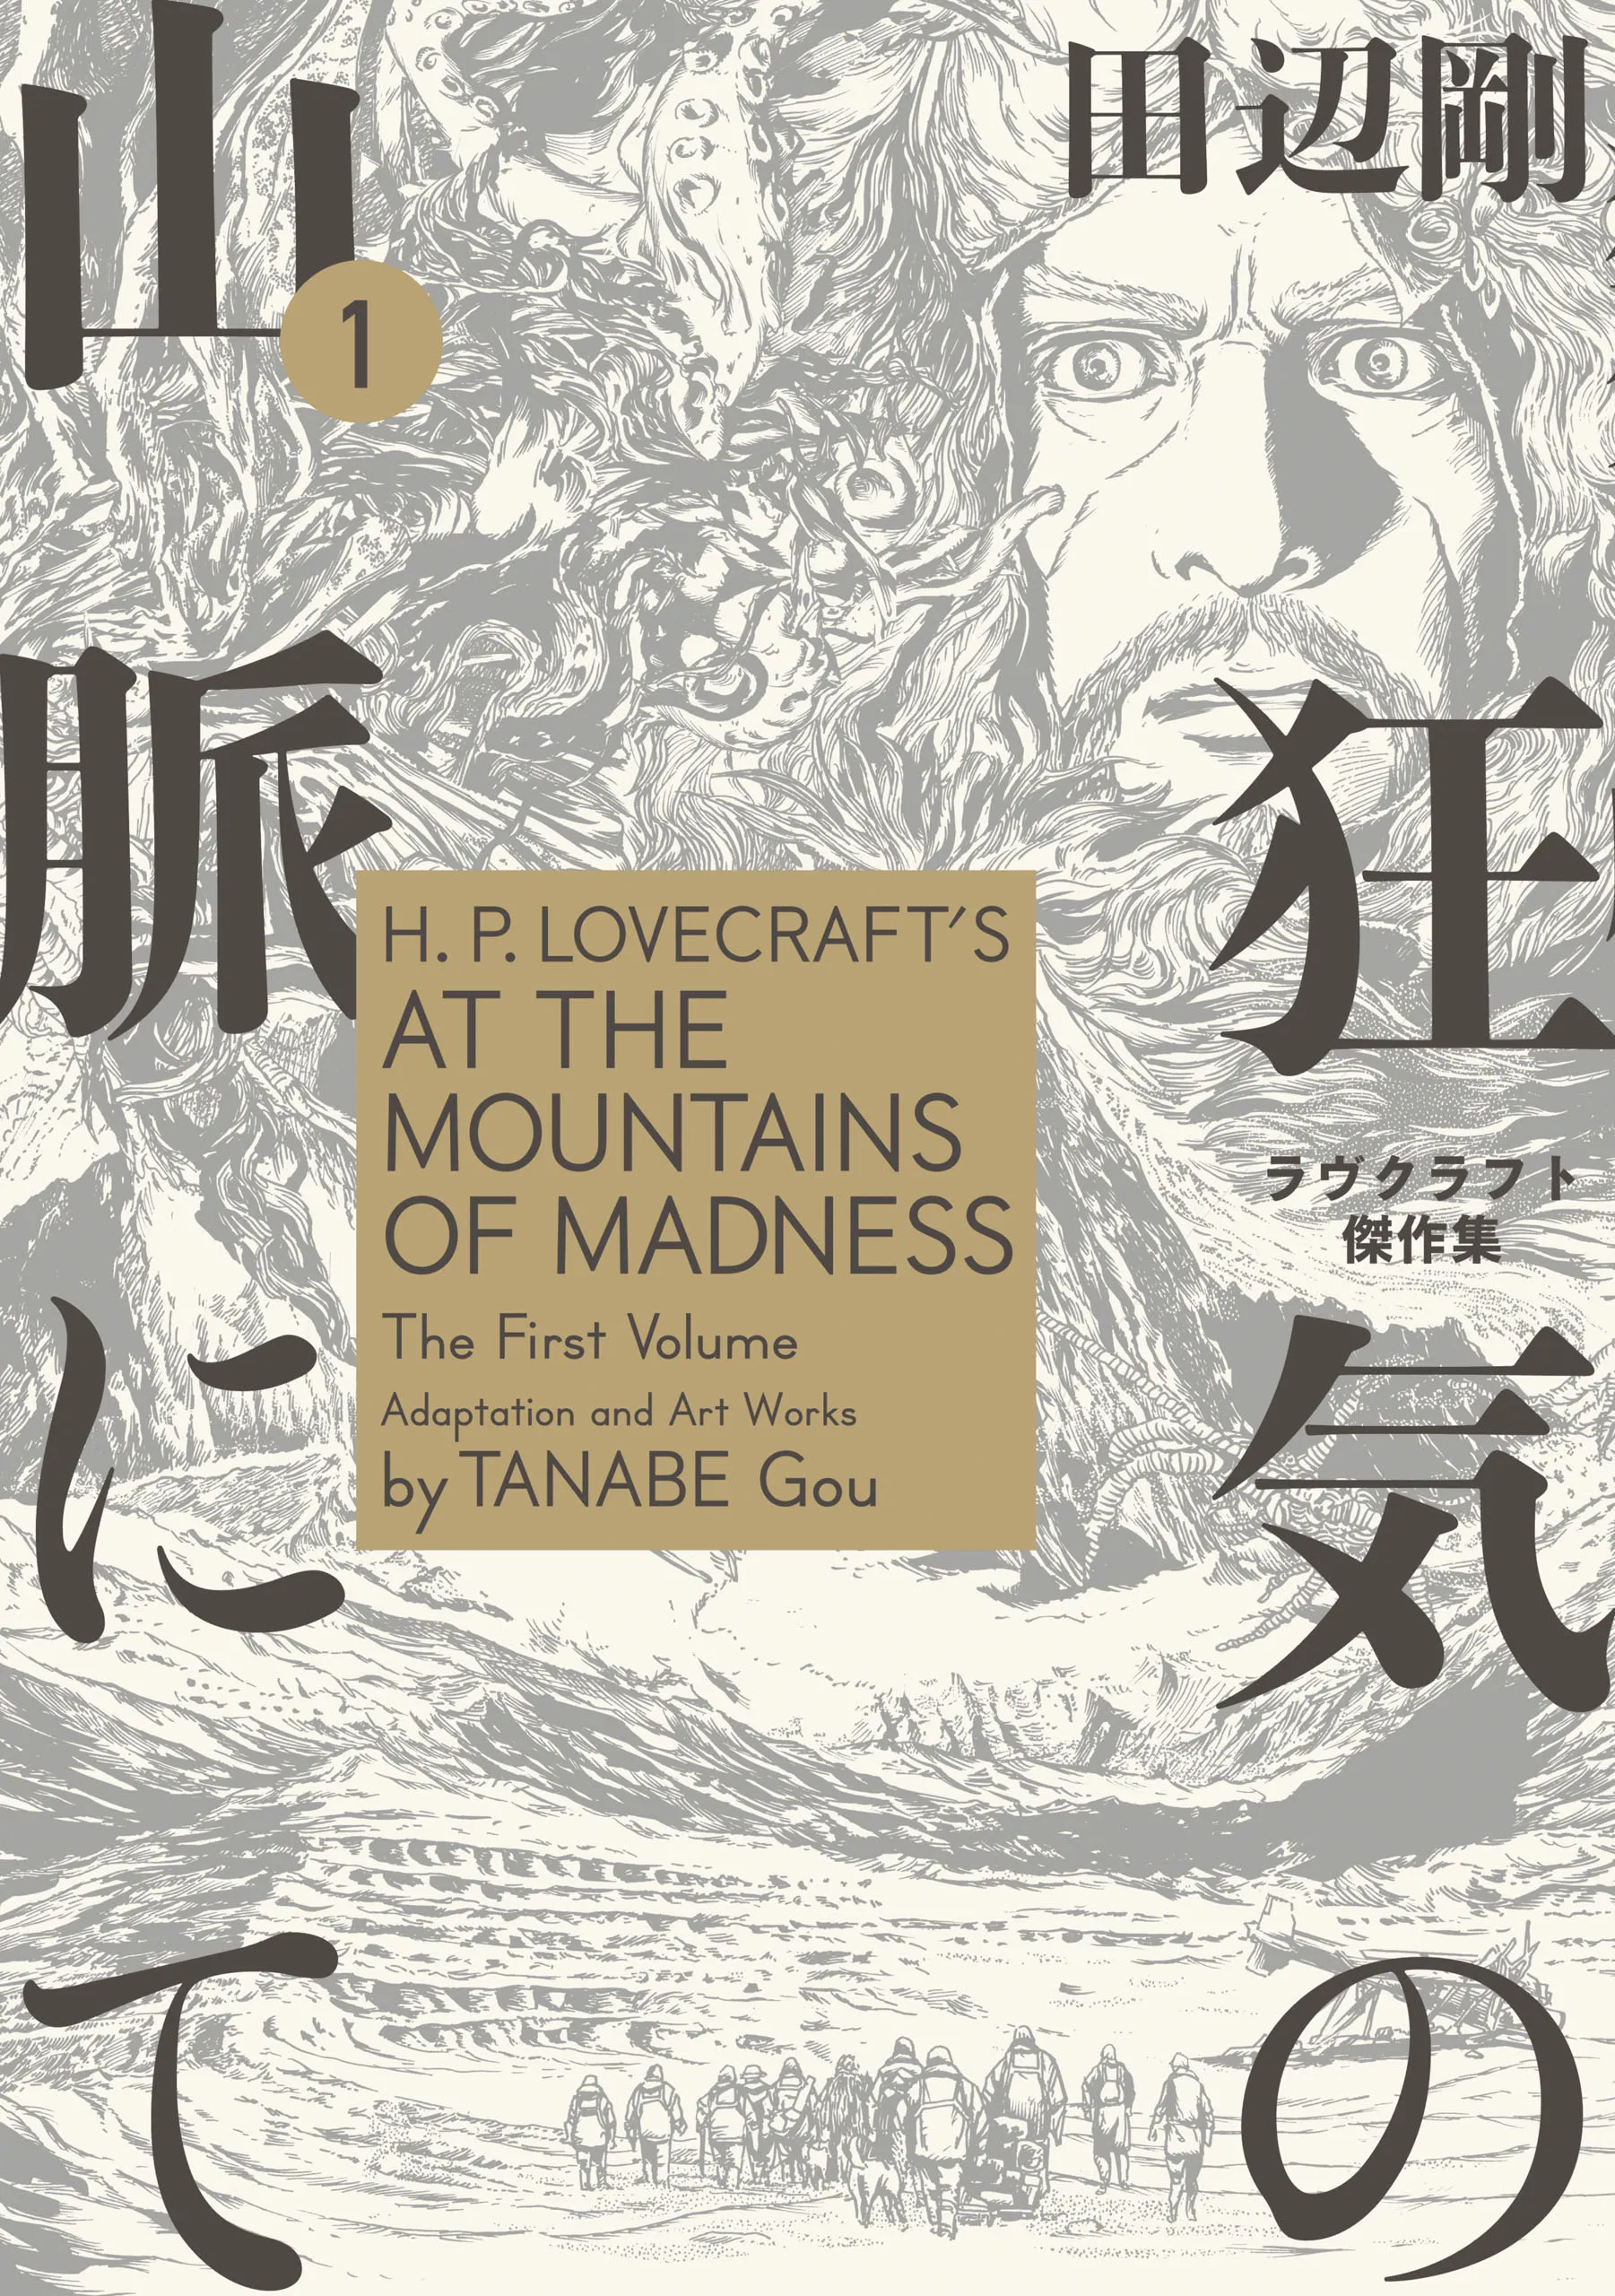 H.P. Lovecraft’s At the Mountains of Madness